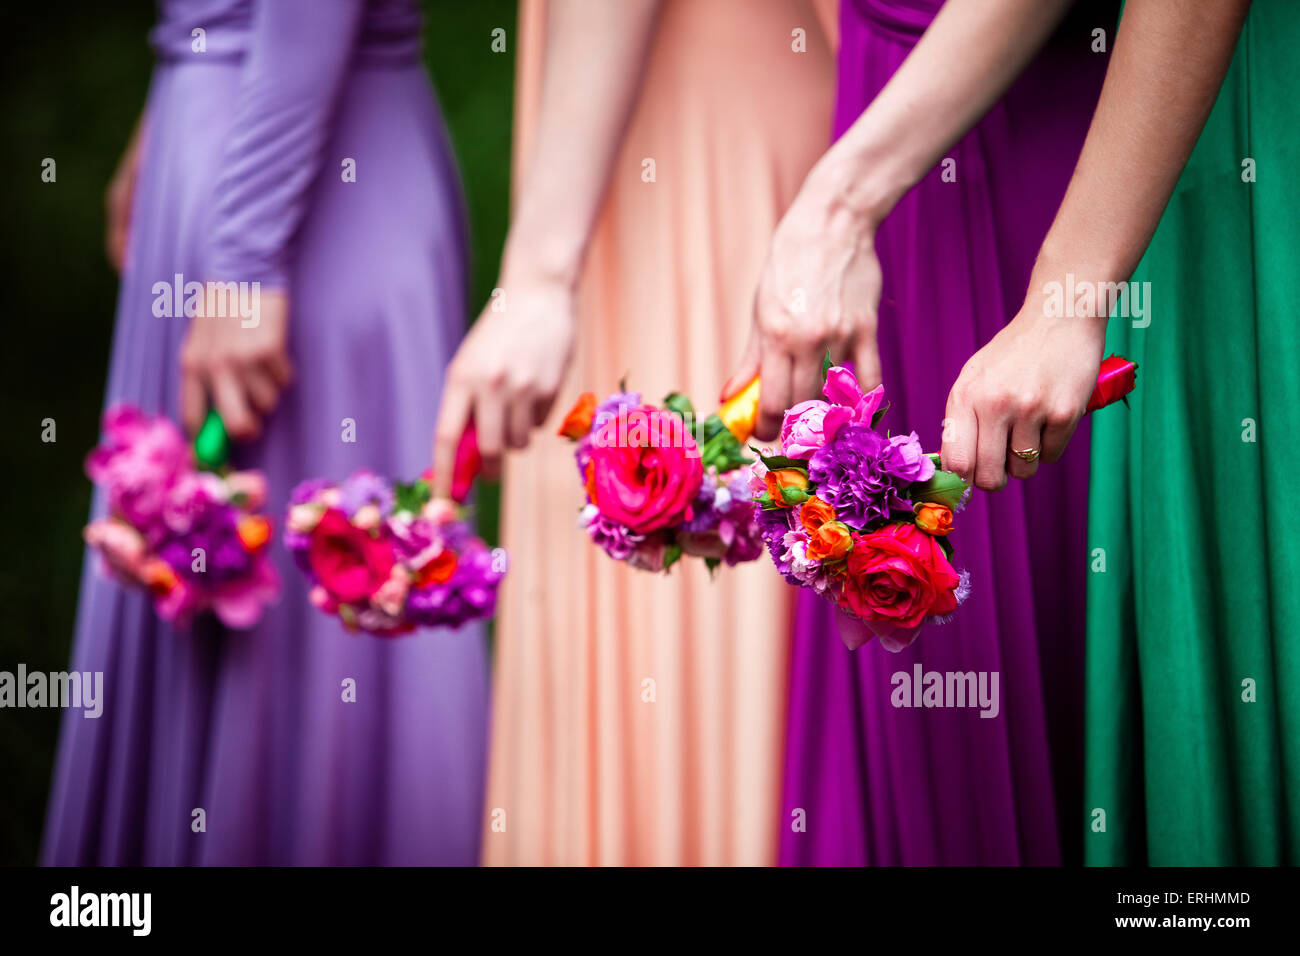 Bridesmaids in colorful dresses with bouquets of flowers Stock Photo